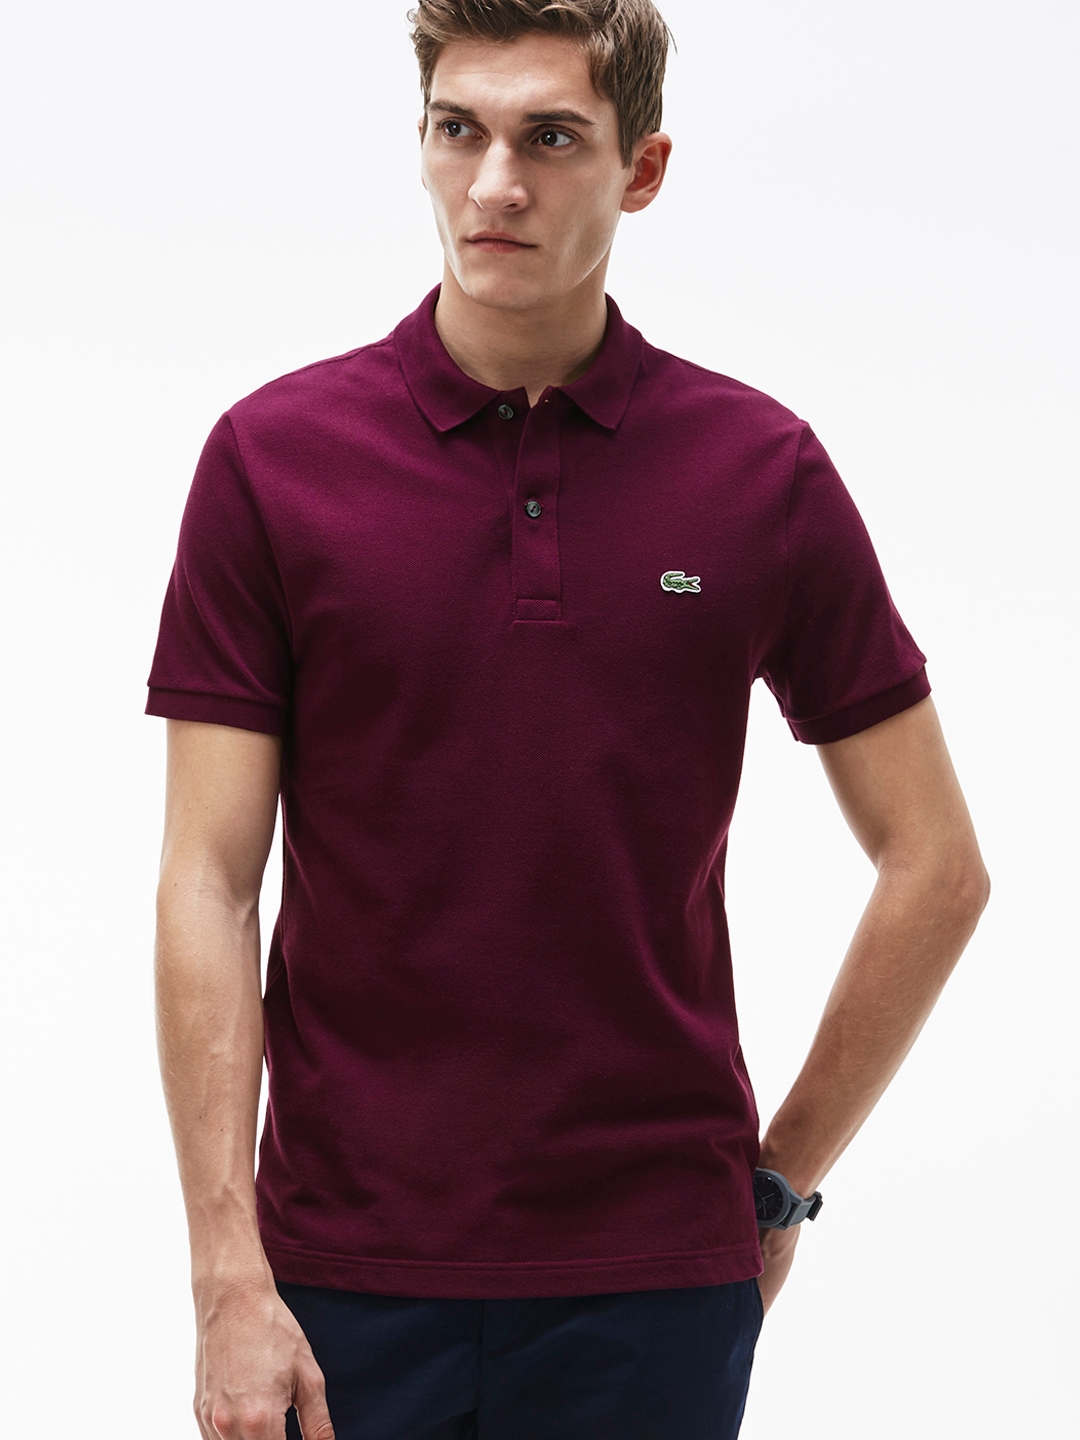 maroon lacoste shirt,Save up to 16%,www.ilcascinone.com